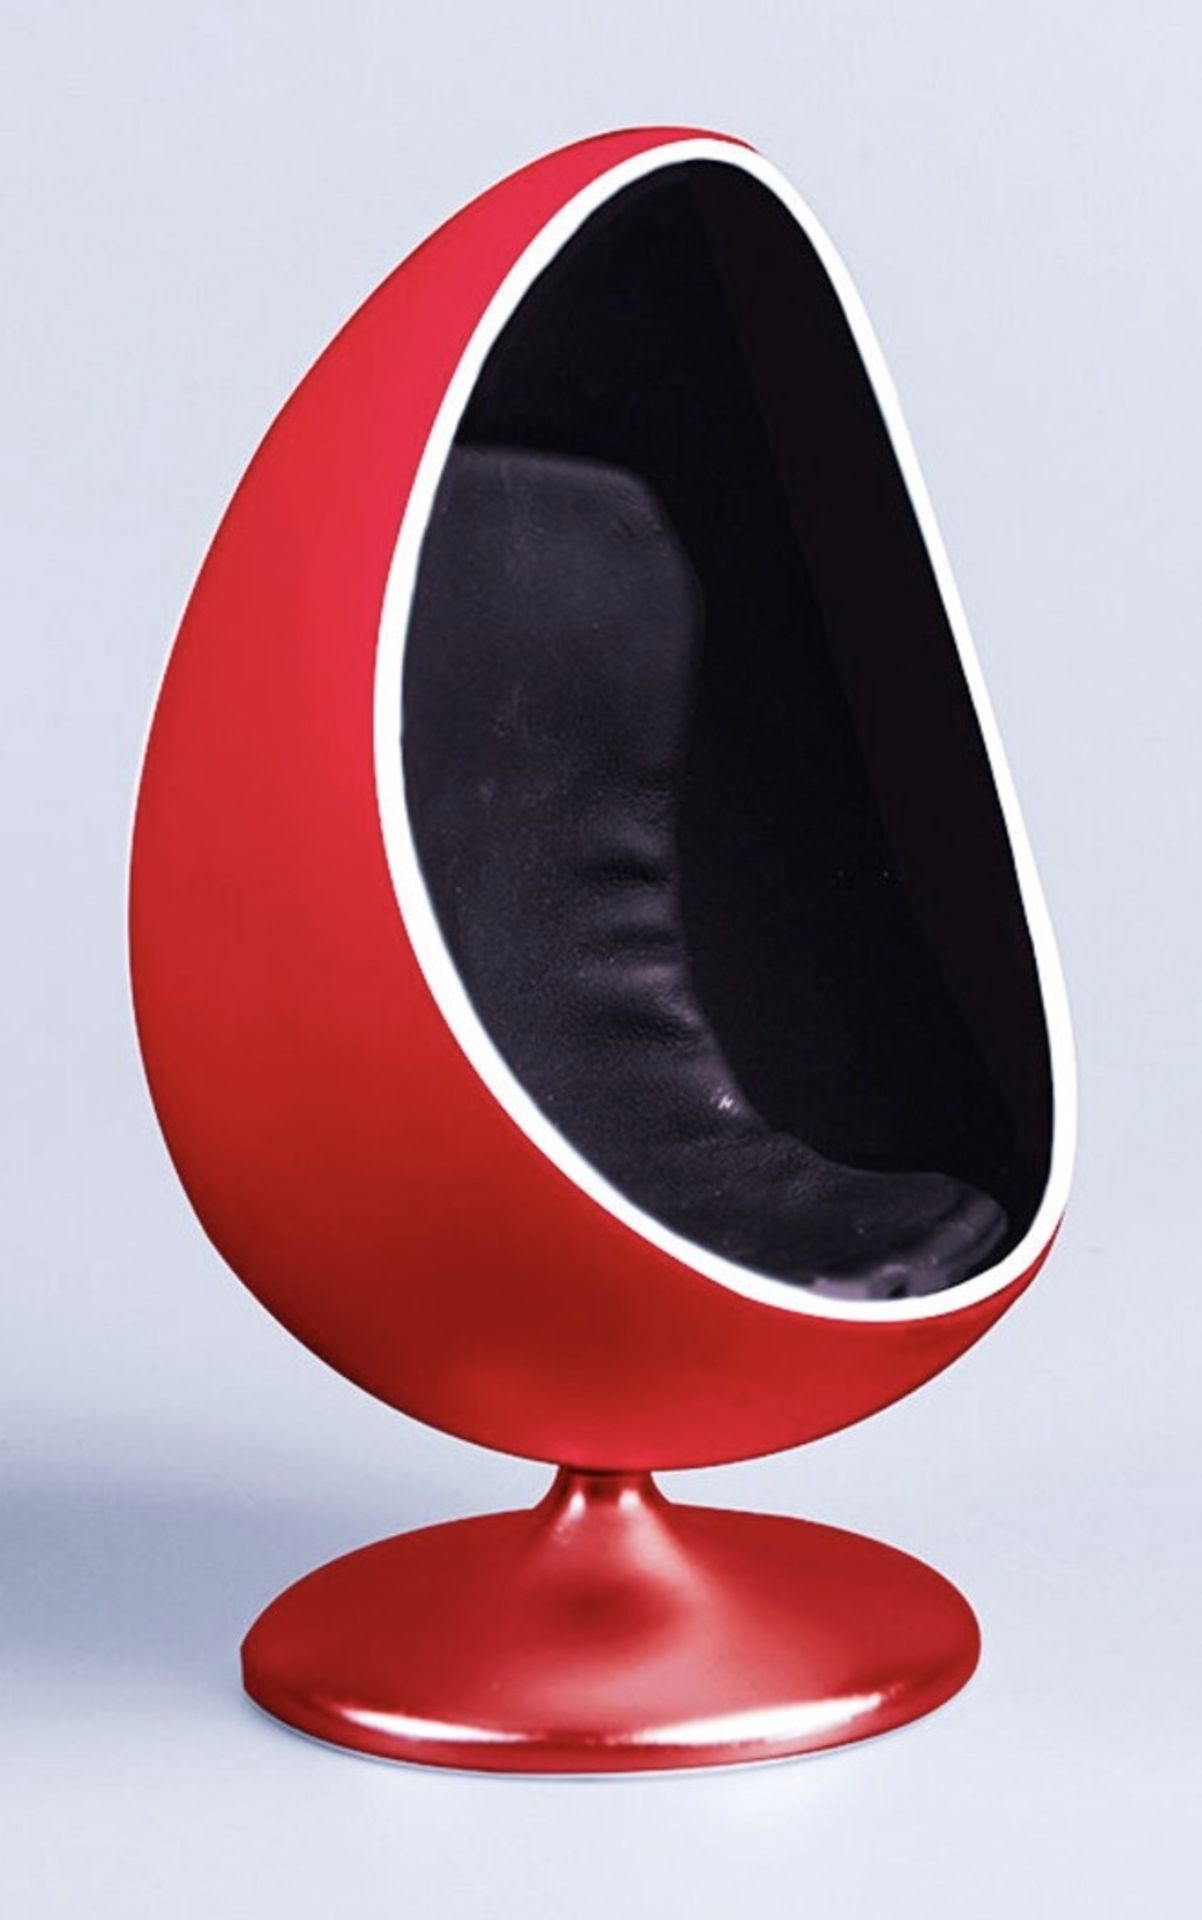 Set of Four 1/12 Scale Egg Chairs - Image 3 of 6